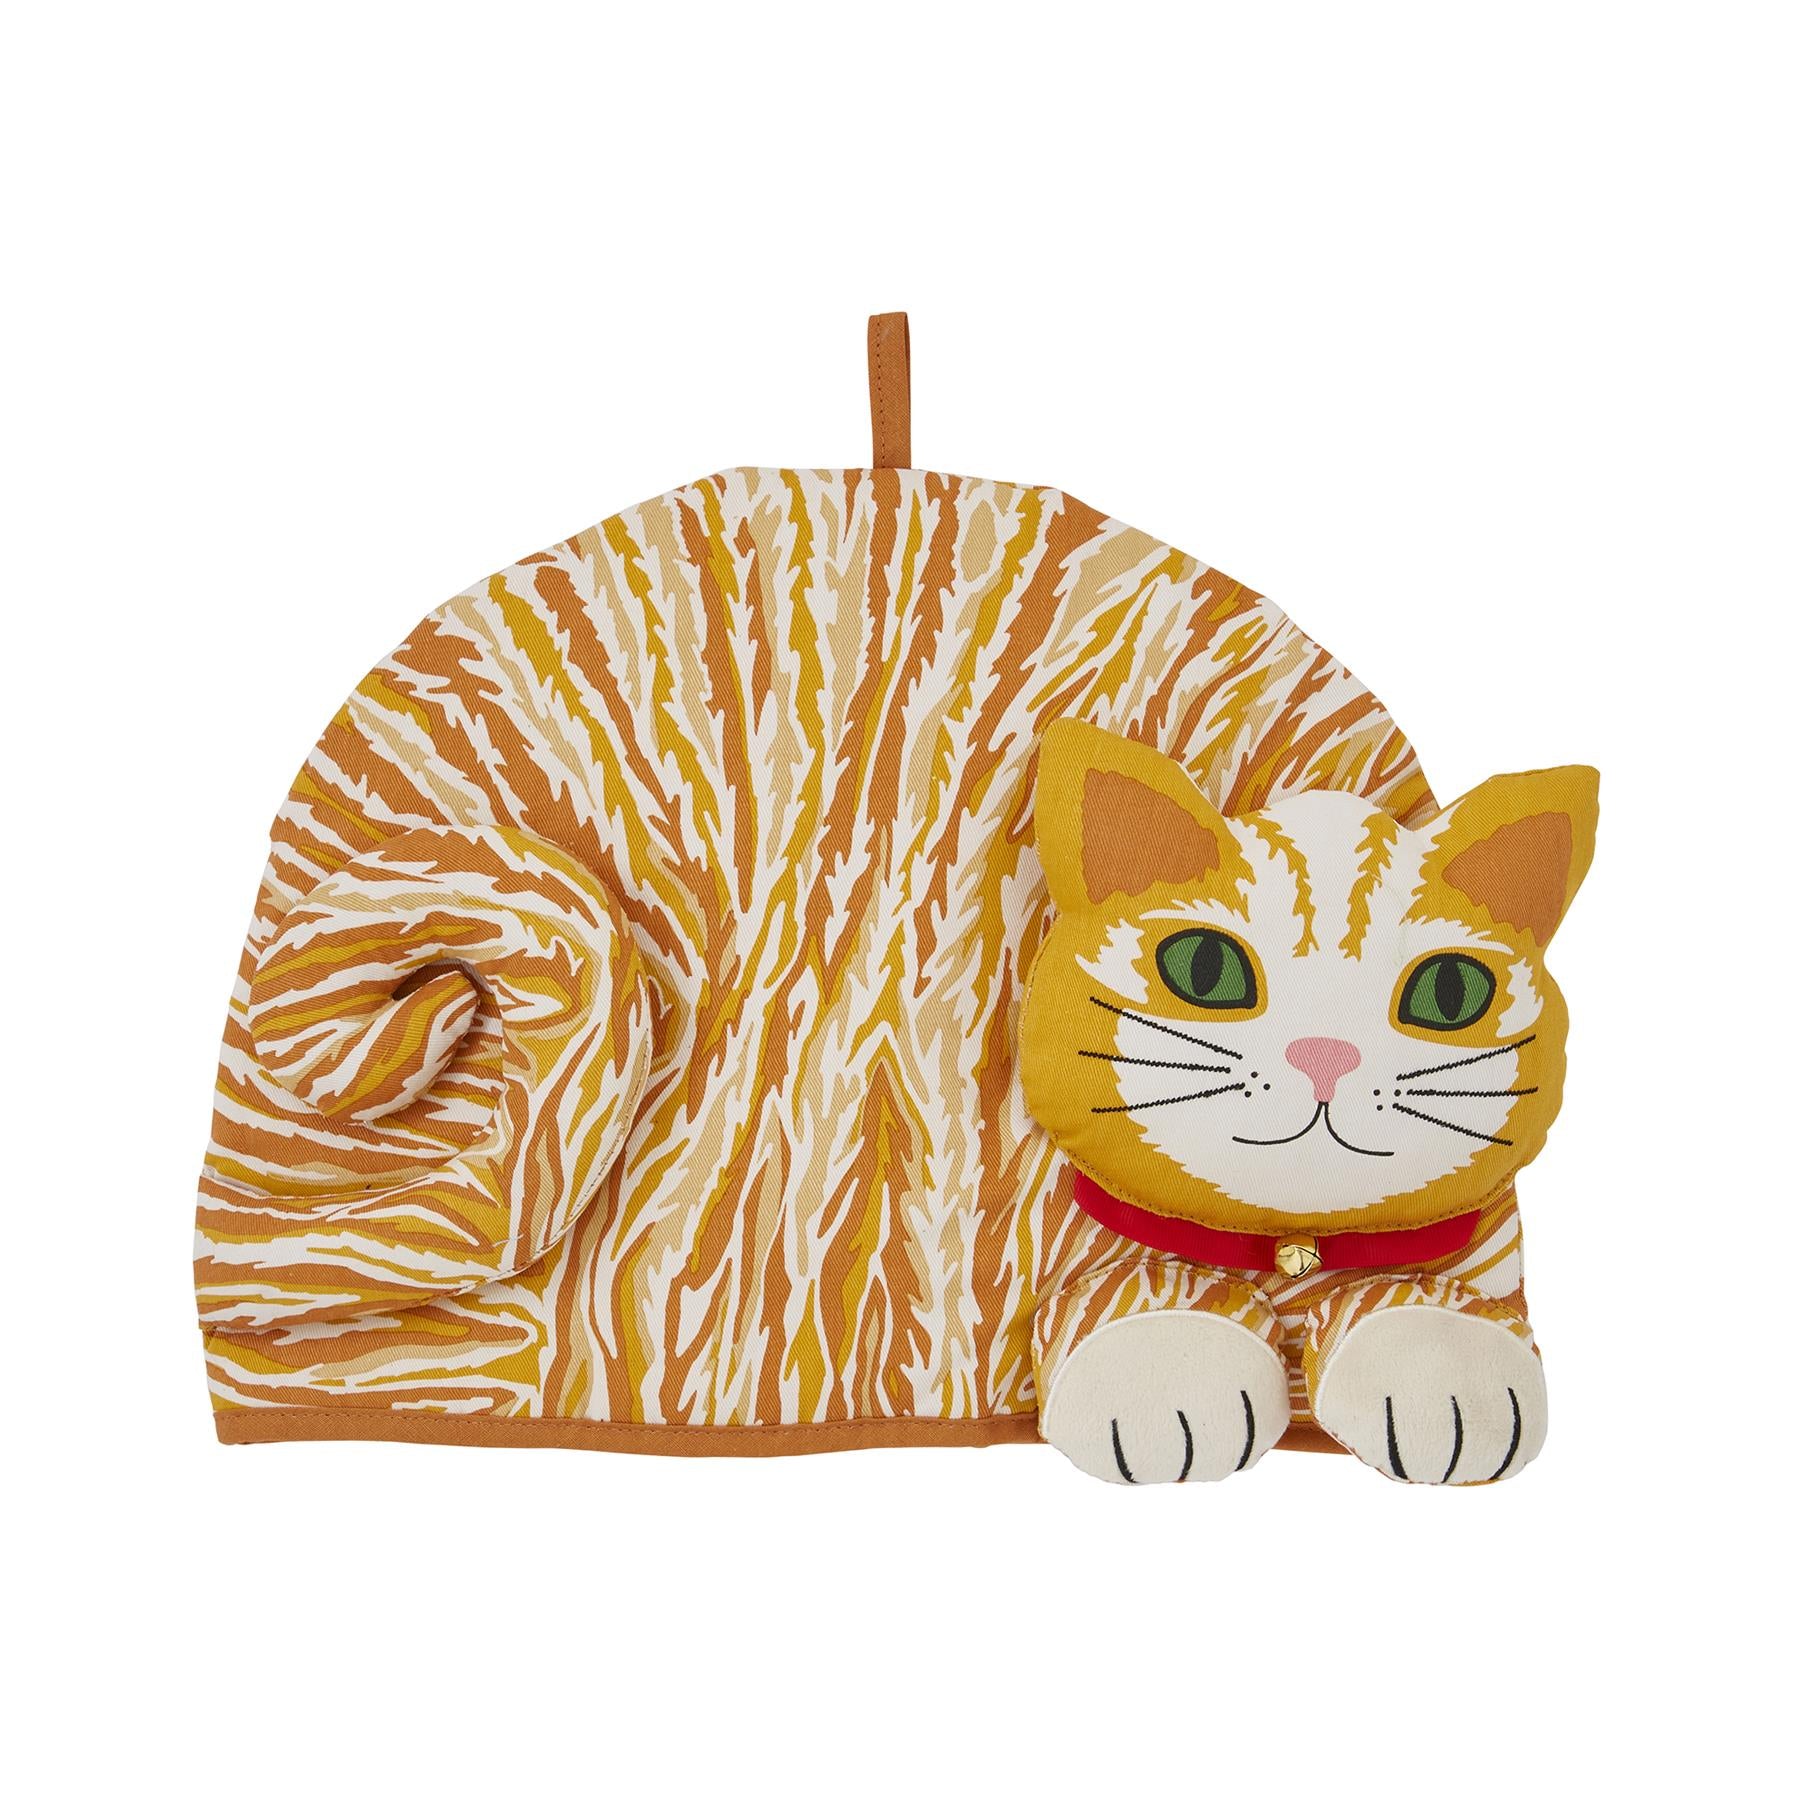 Ulster Weavers Ginger Cat Shaped Tea Cosy